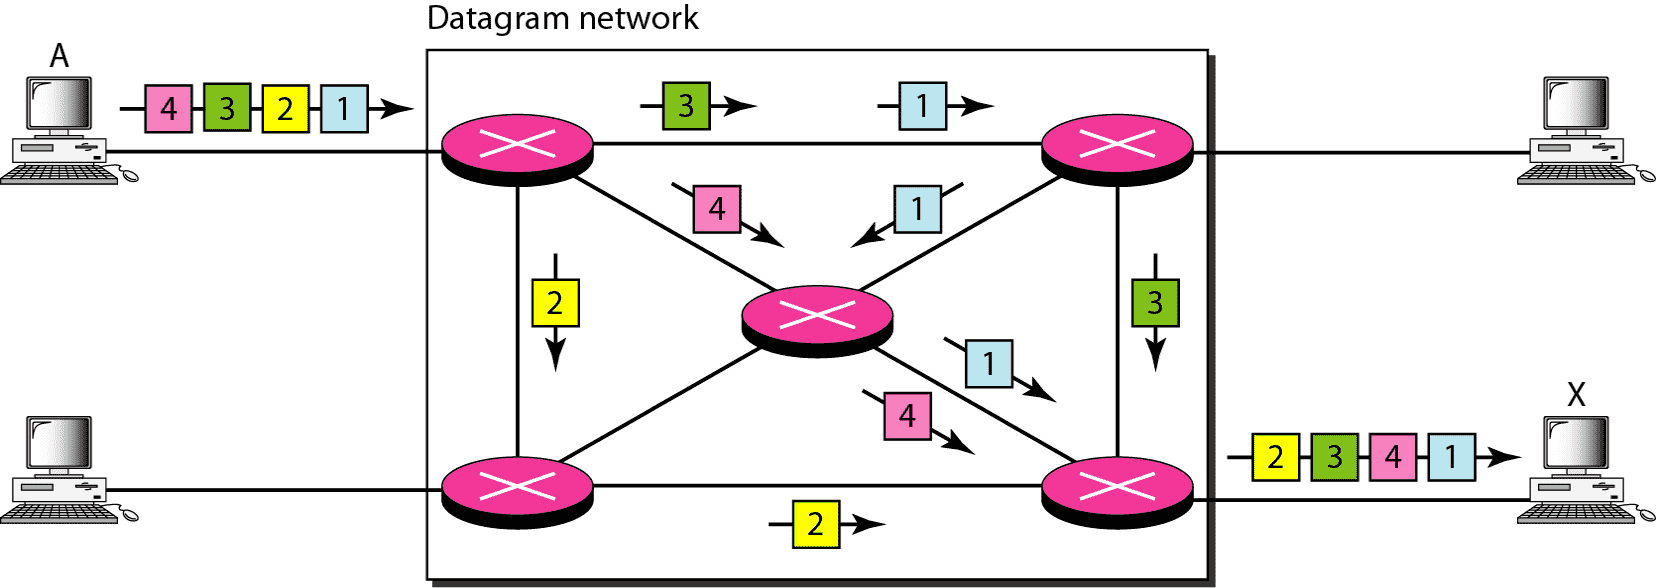 Datagram Approach with Single Channel